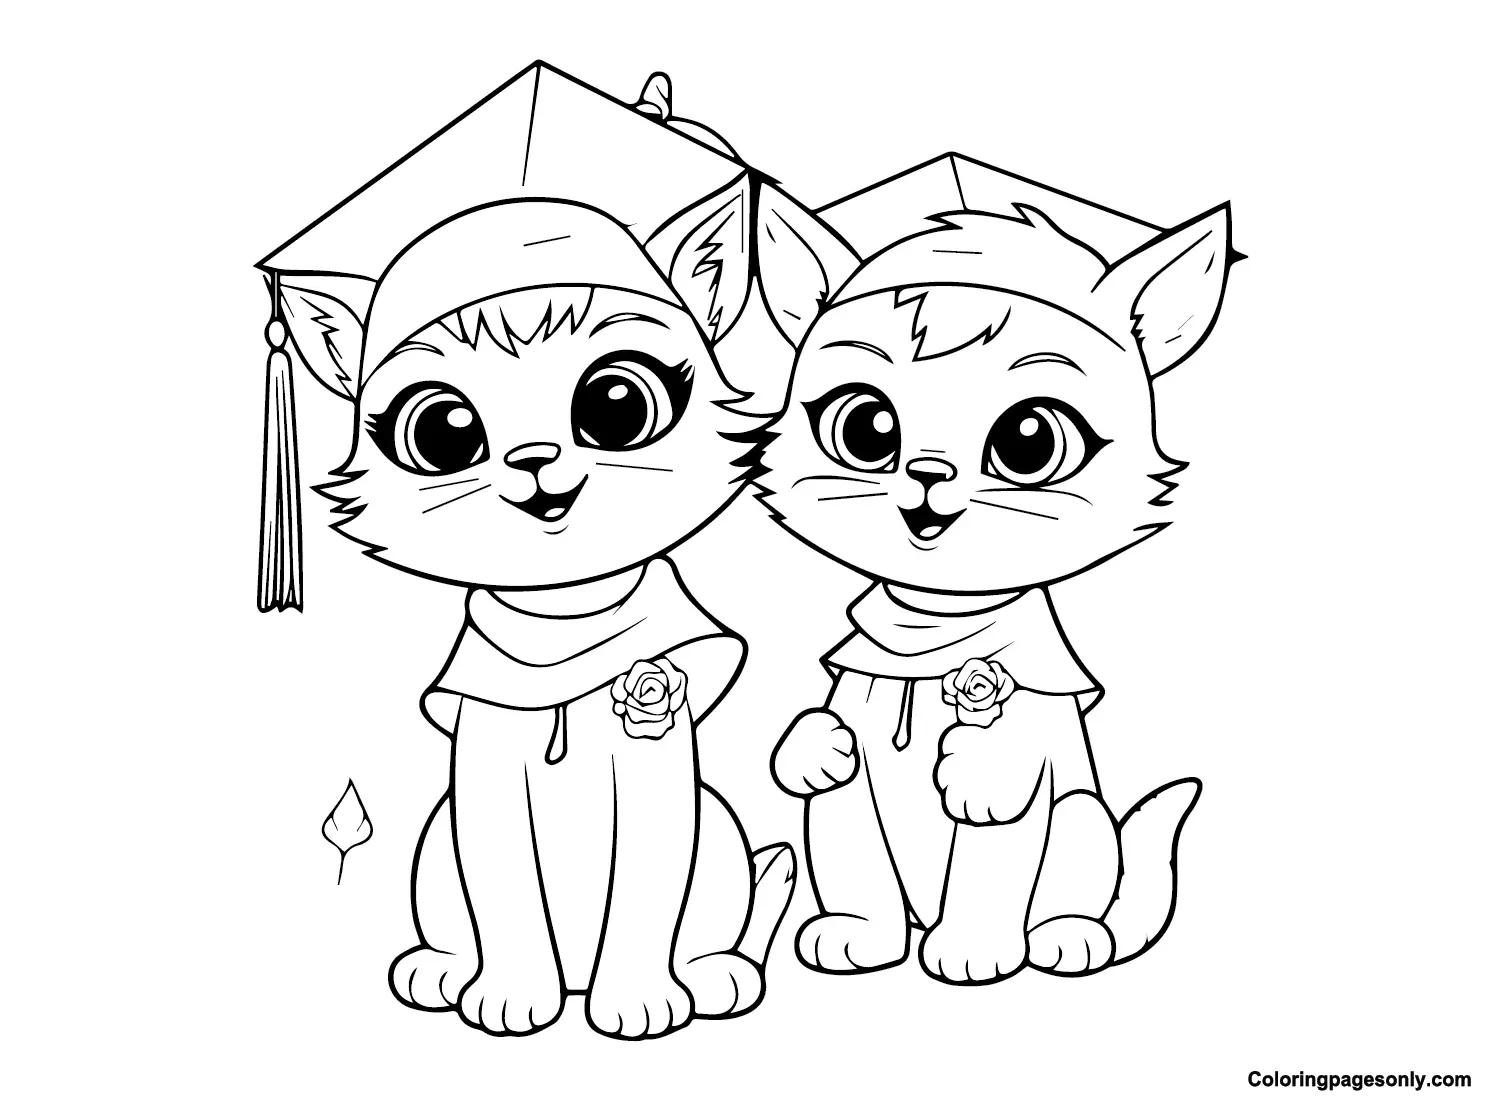 Last Day of School Coloring Pages